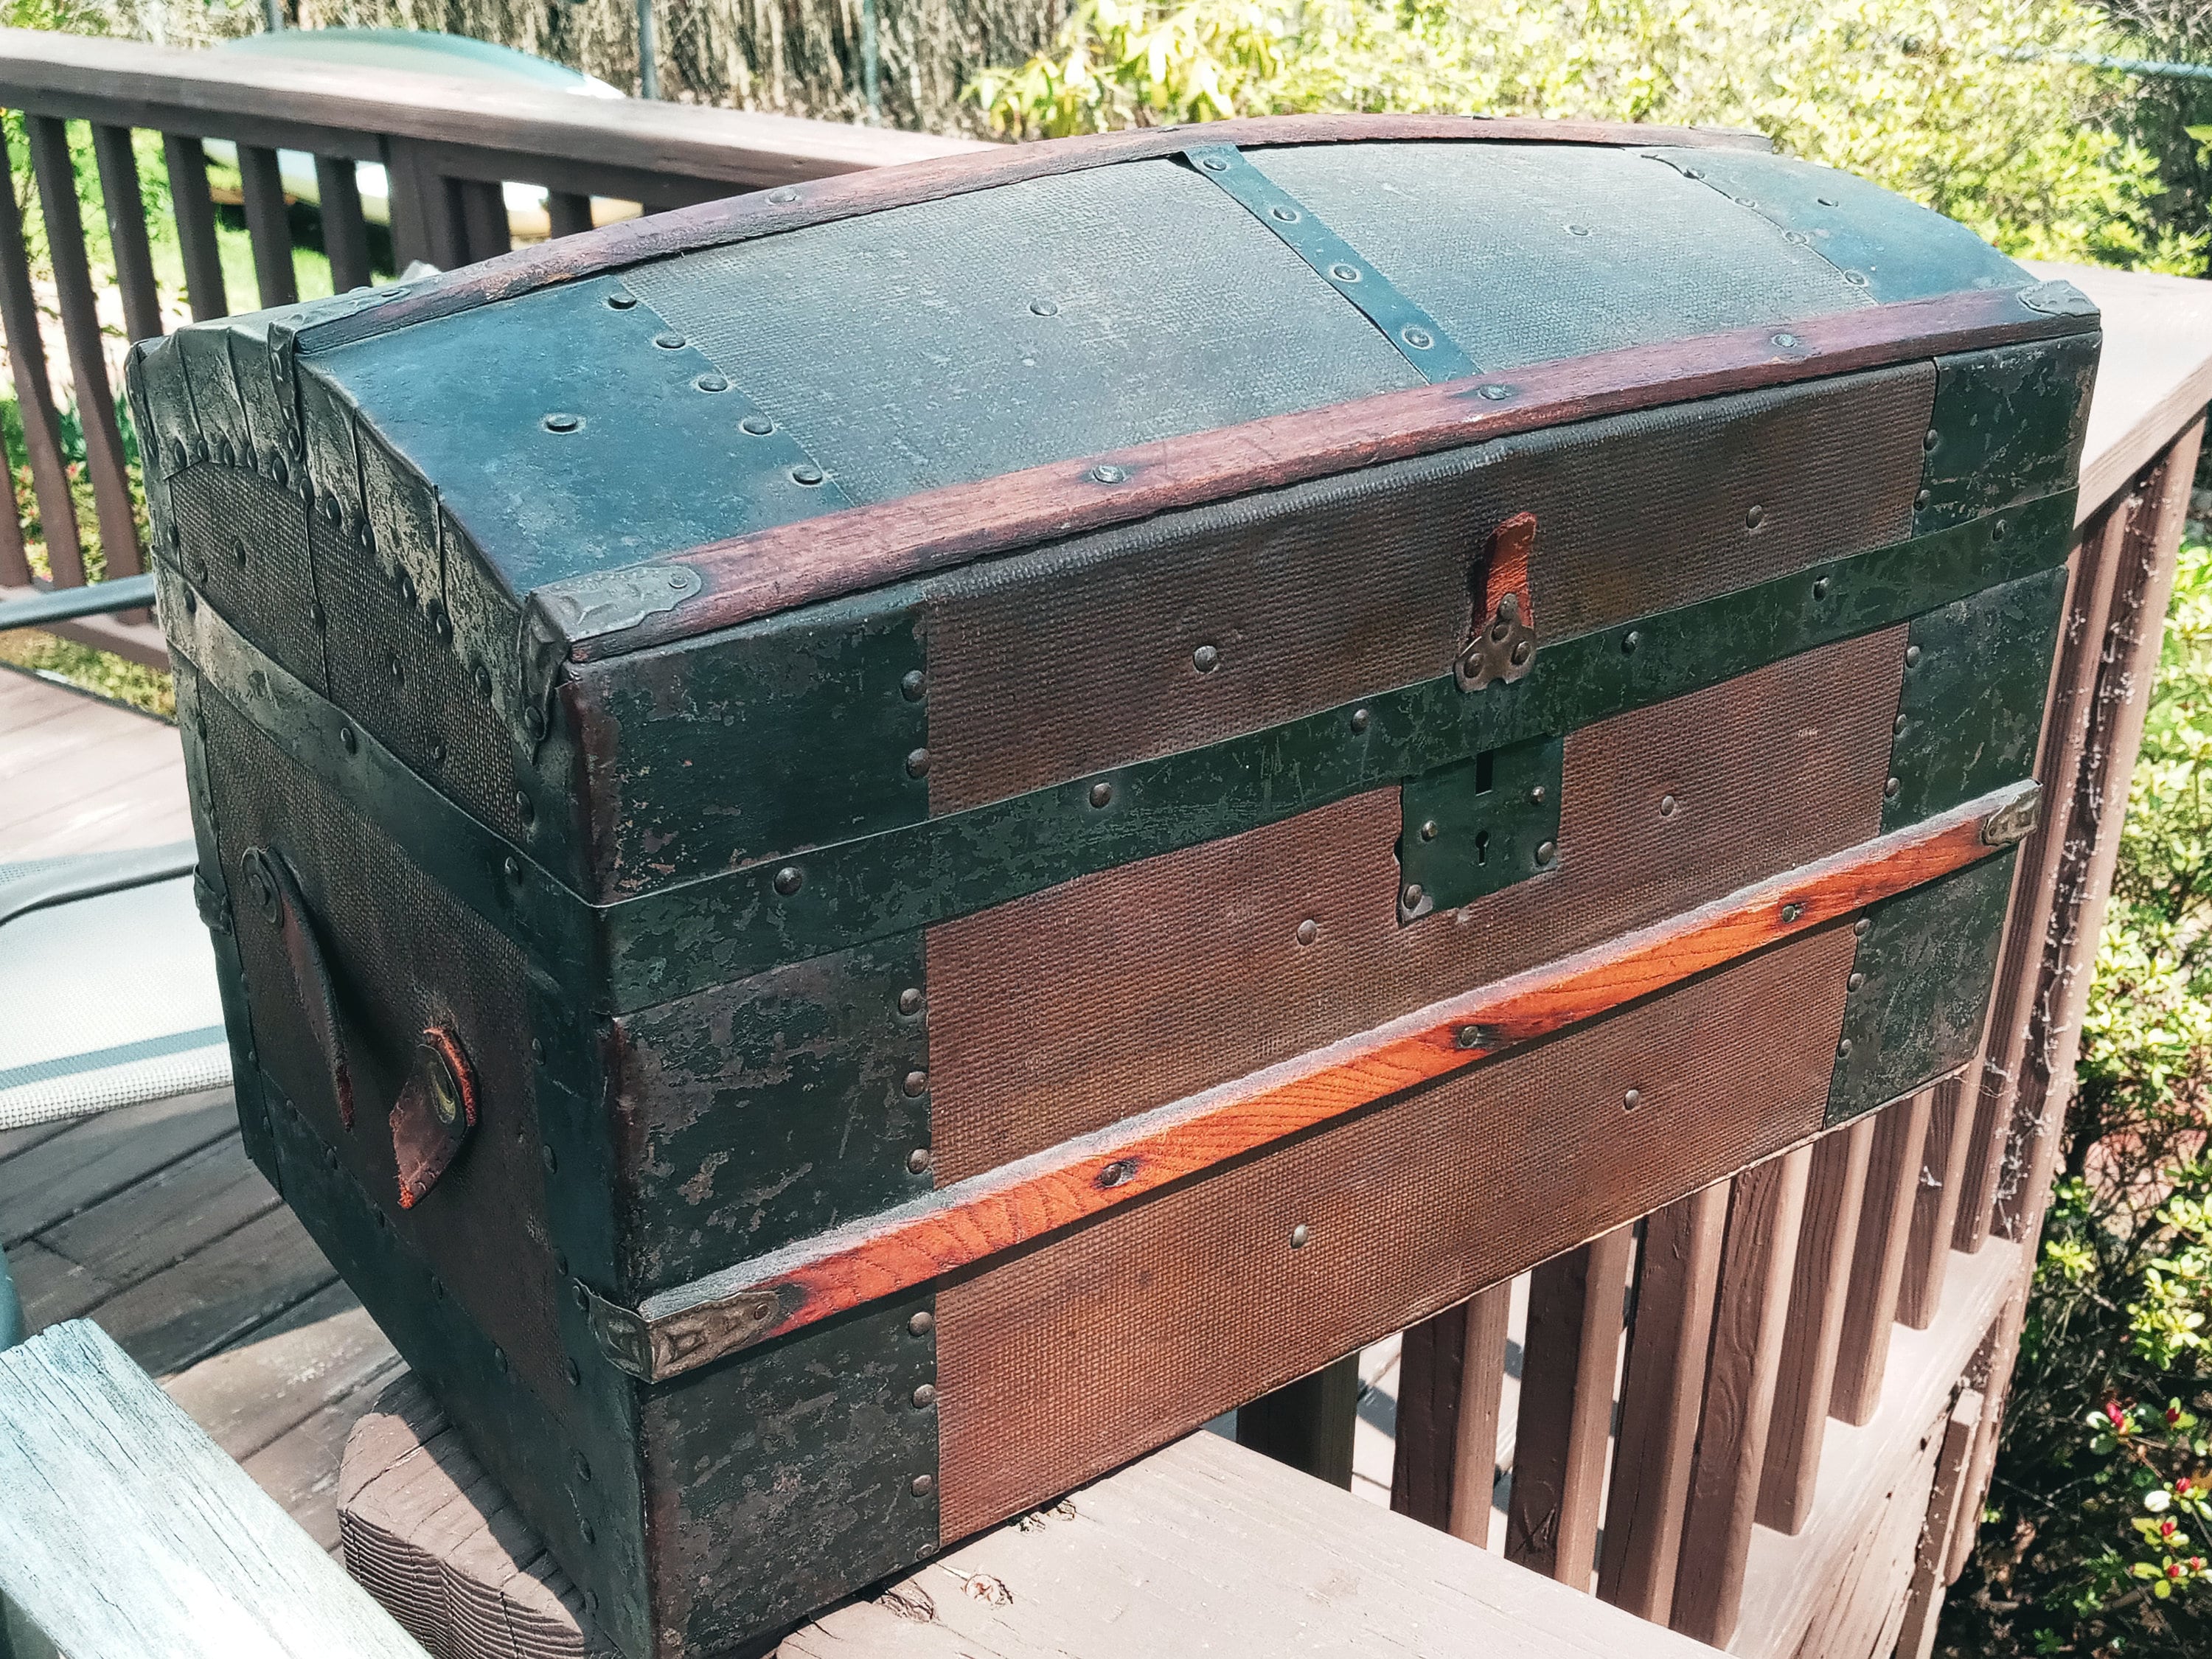 1890s Elegantly Distressed Antique Steamer Travel Trunk Aged Leather Wood &  Iron